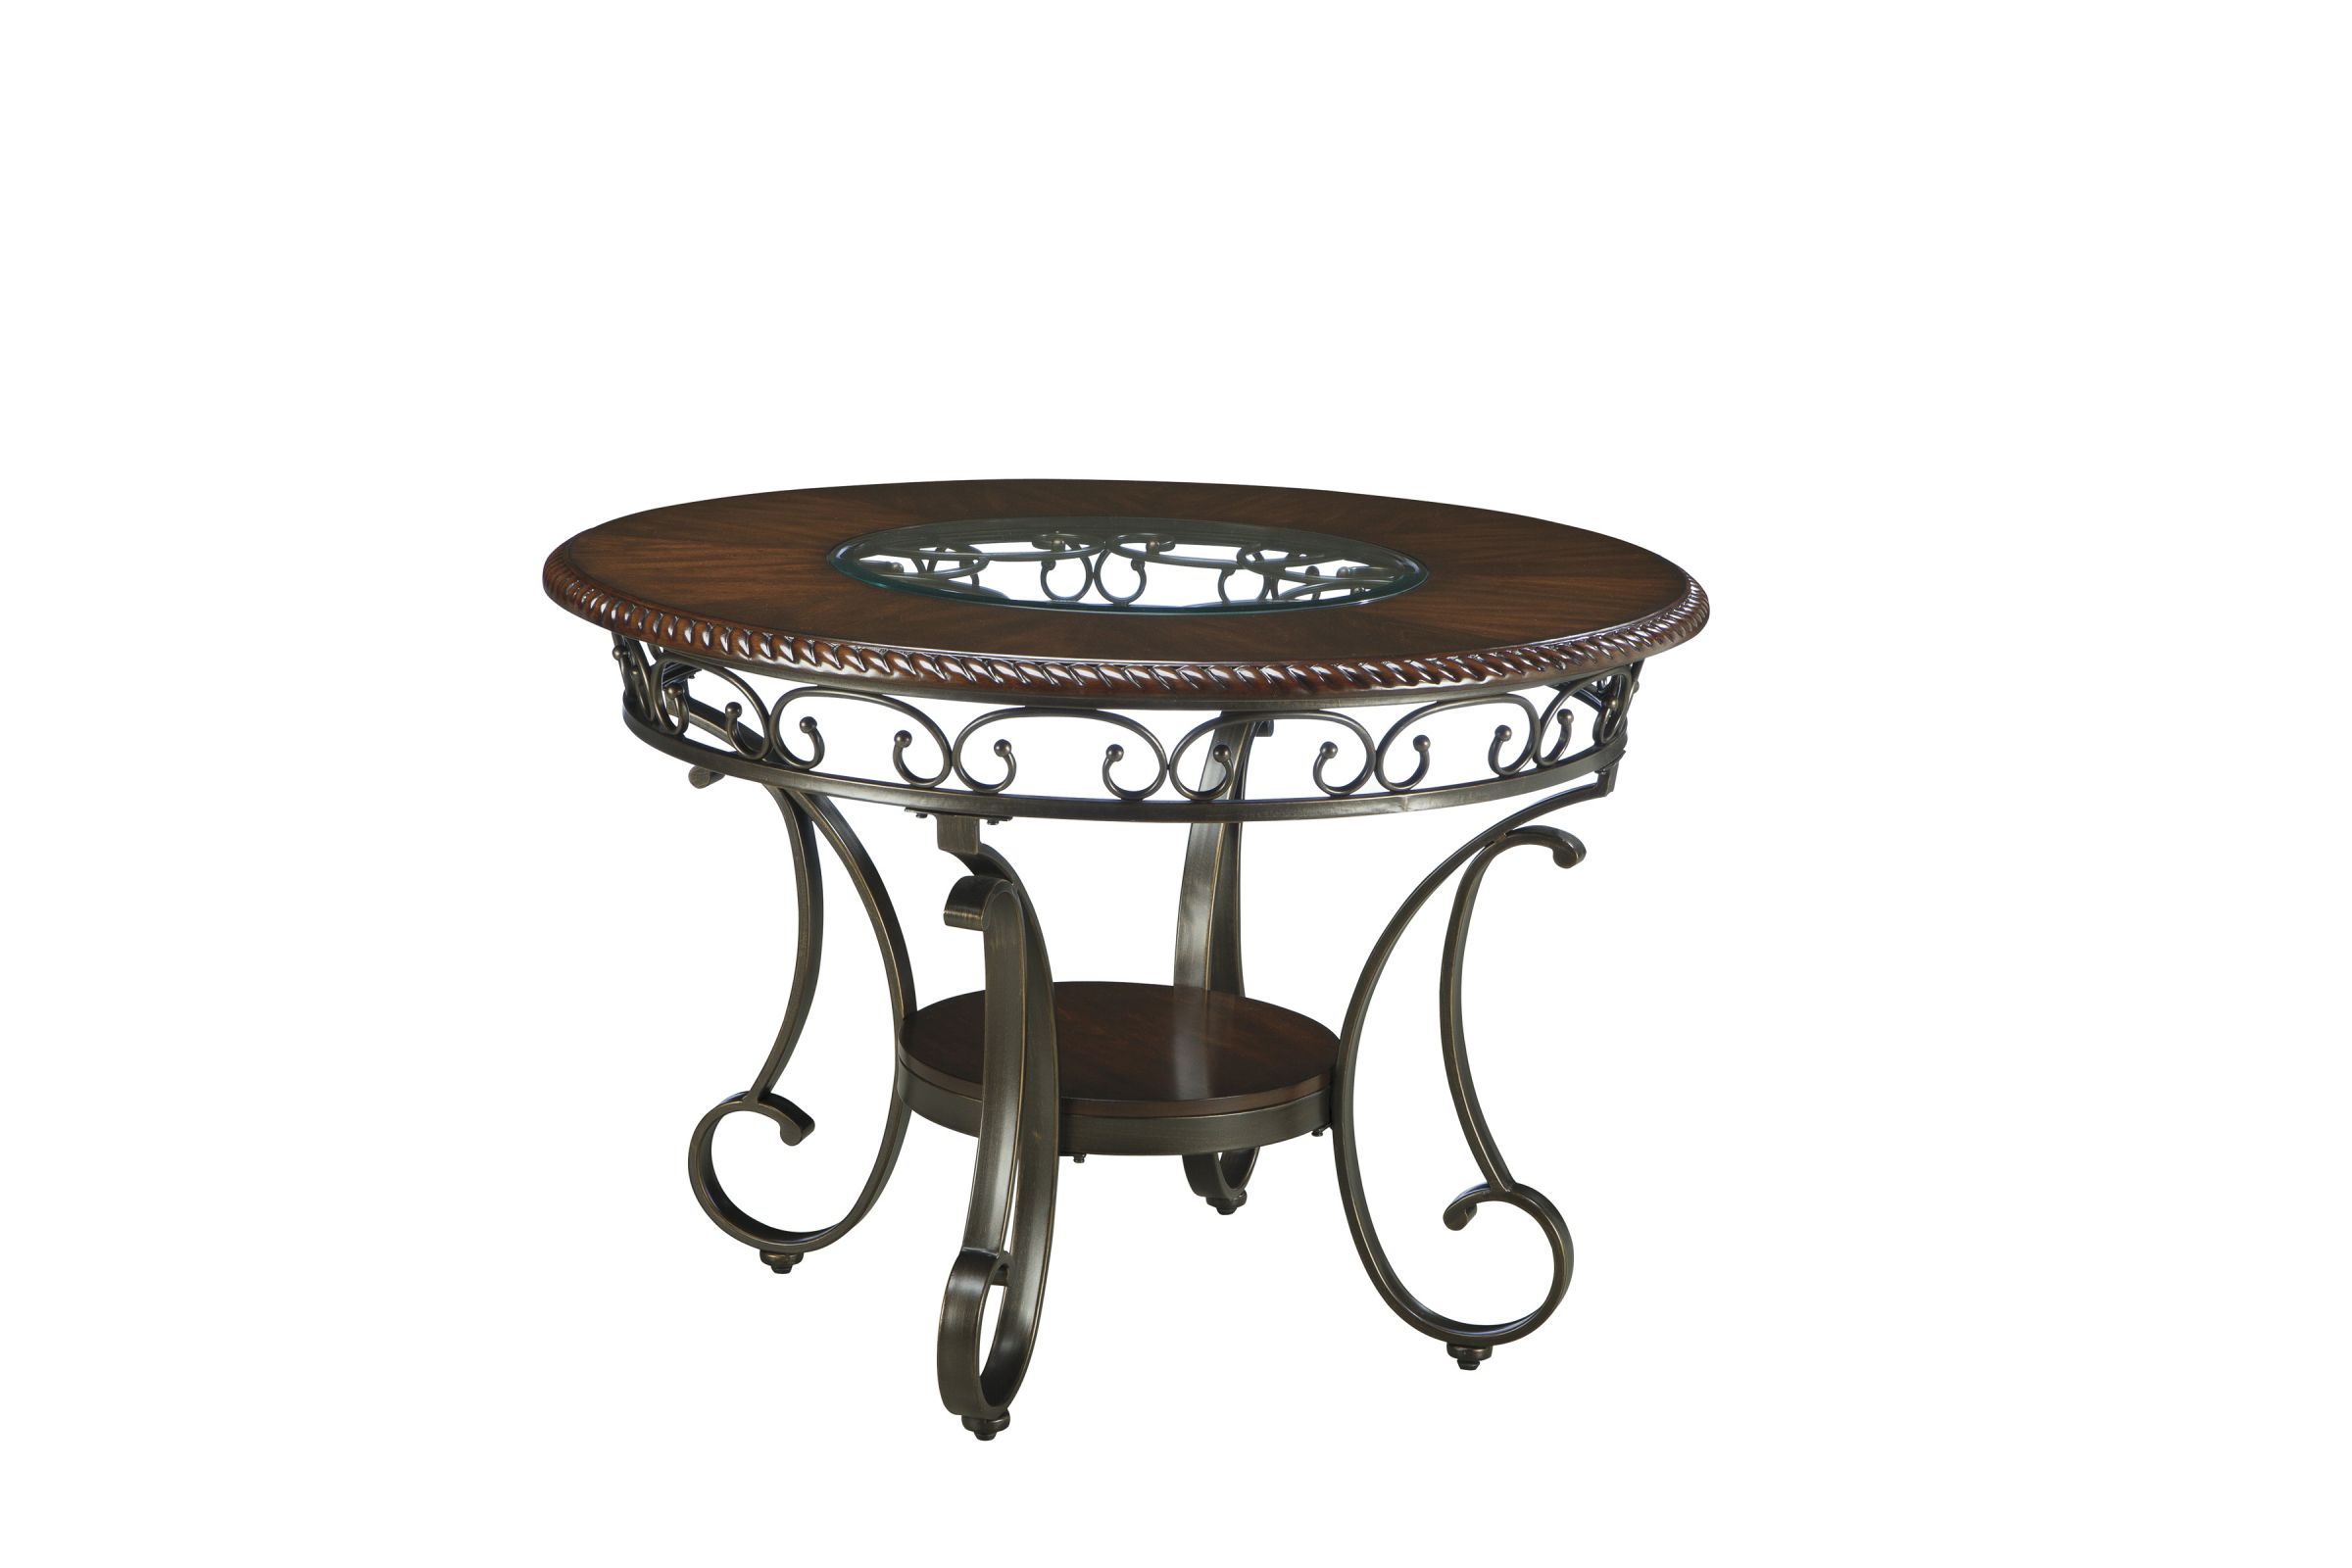 Glambrey Round Dining Room Table by Ashley